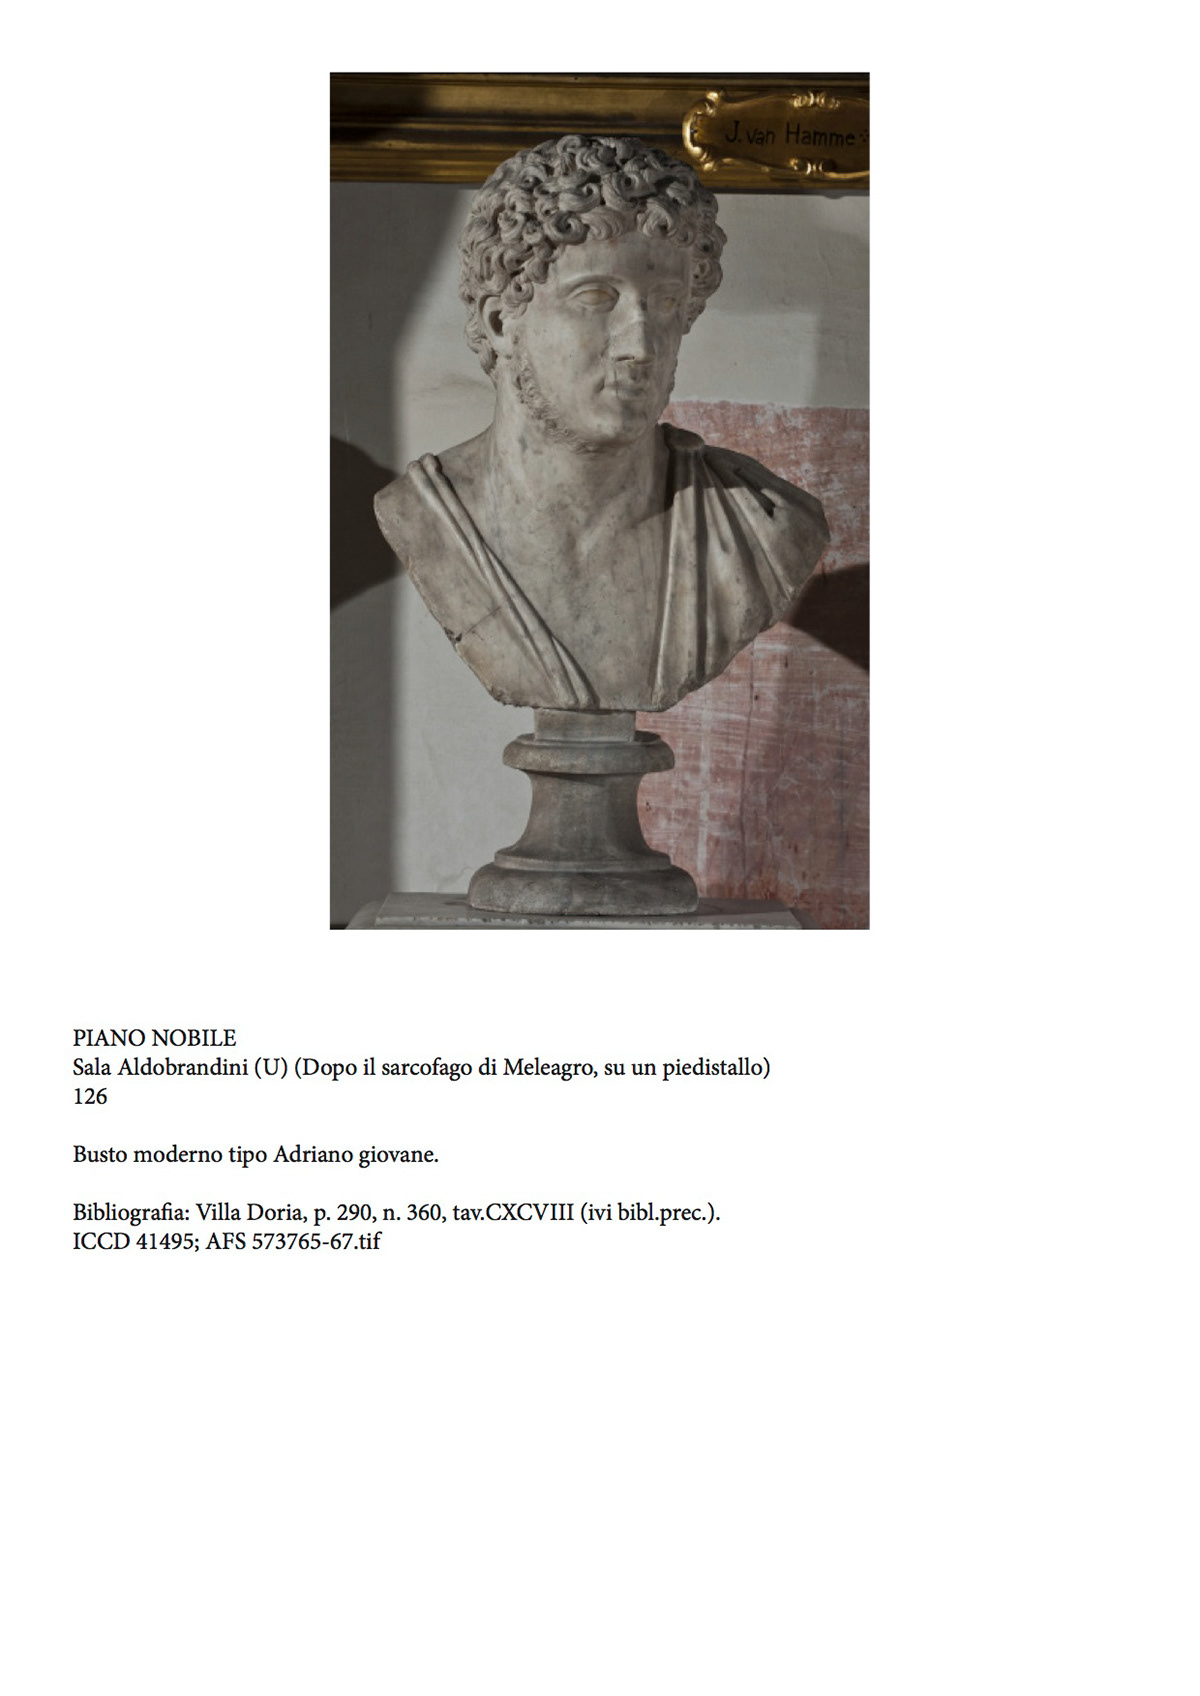 artexhibition archeological Curating Finearts istanbul